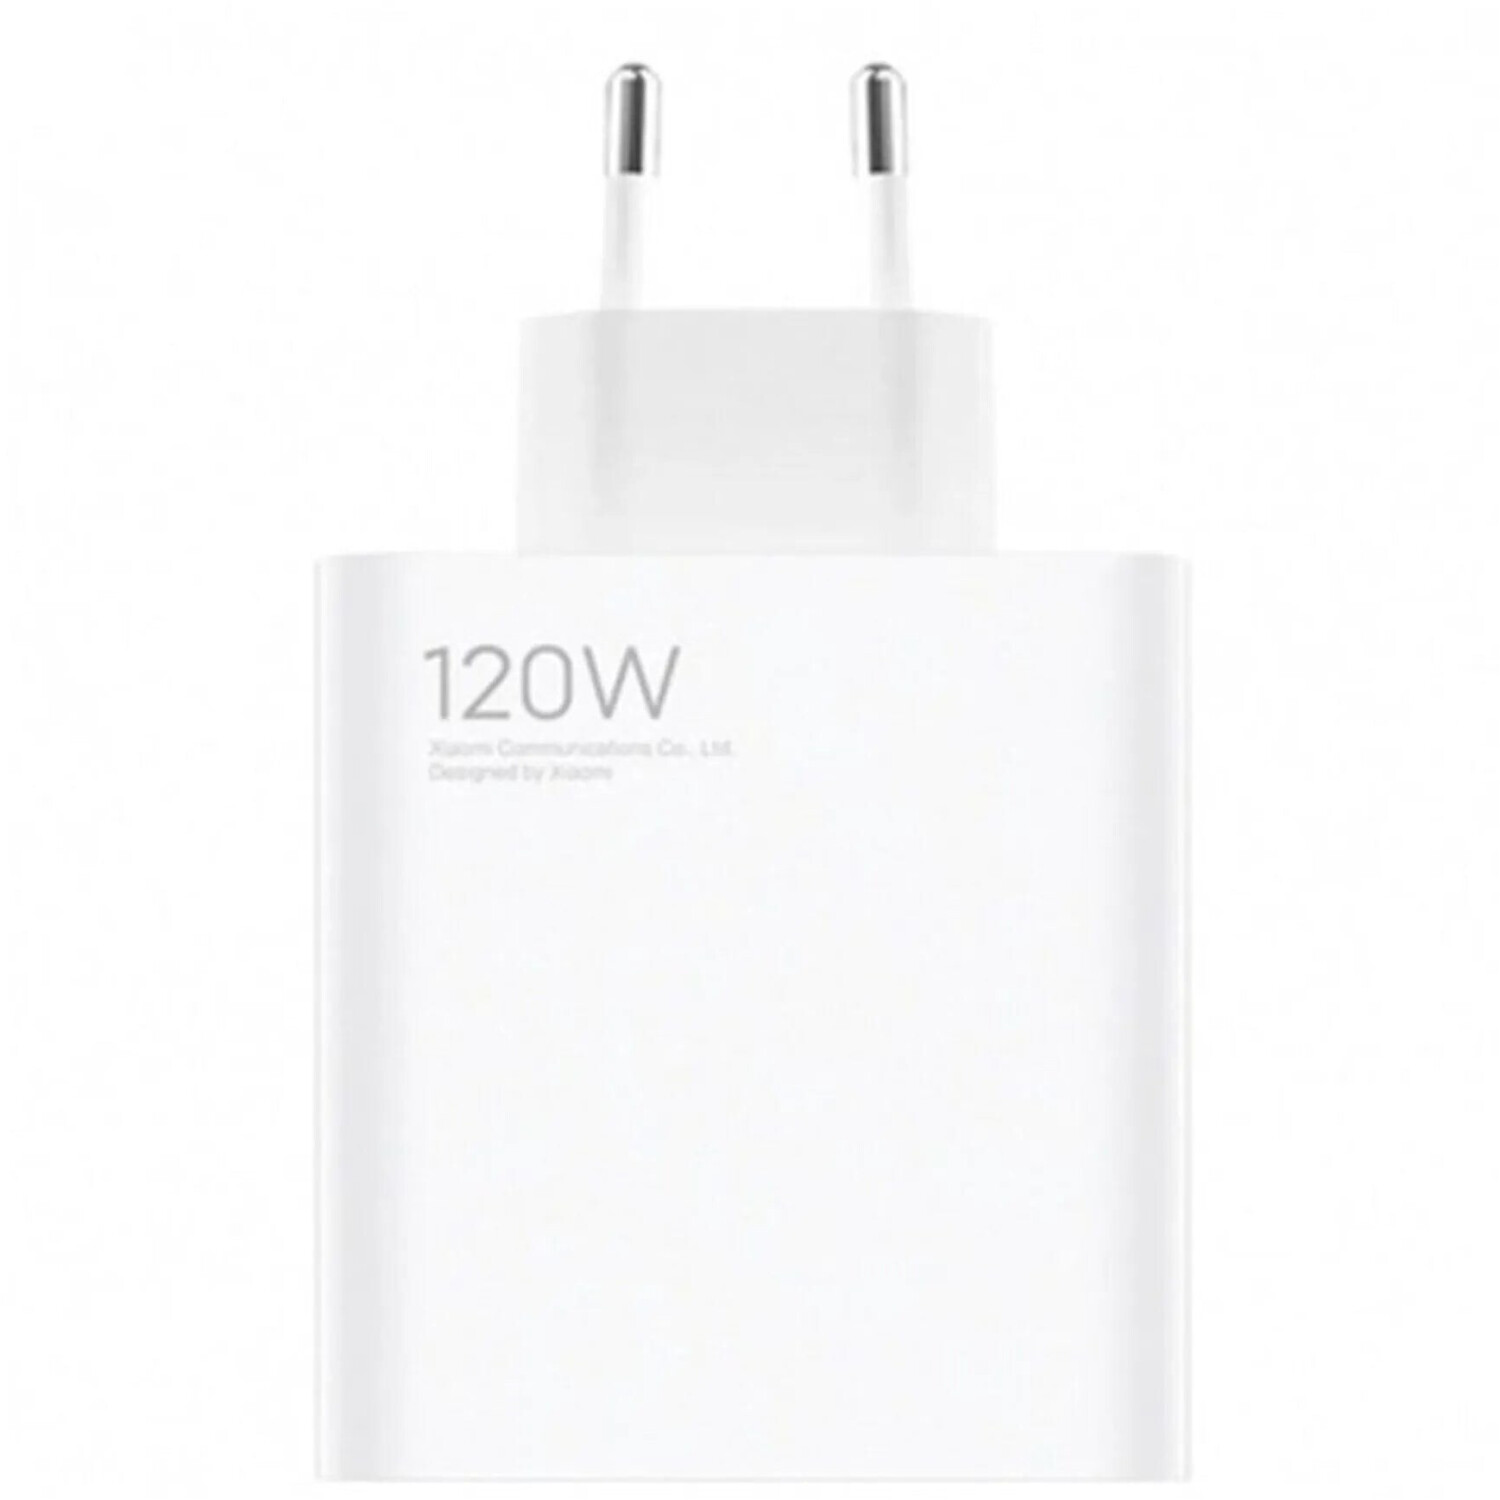 Chargeur Xiaomi 12 - Puissance : 67W - Type A